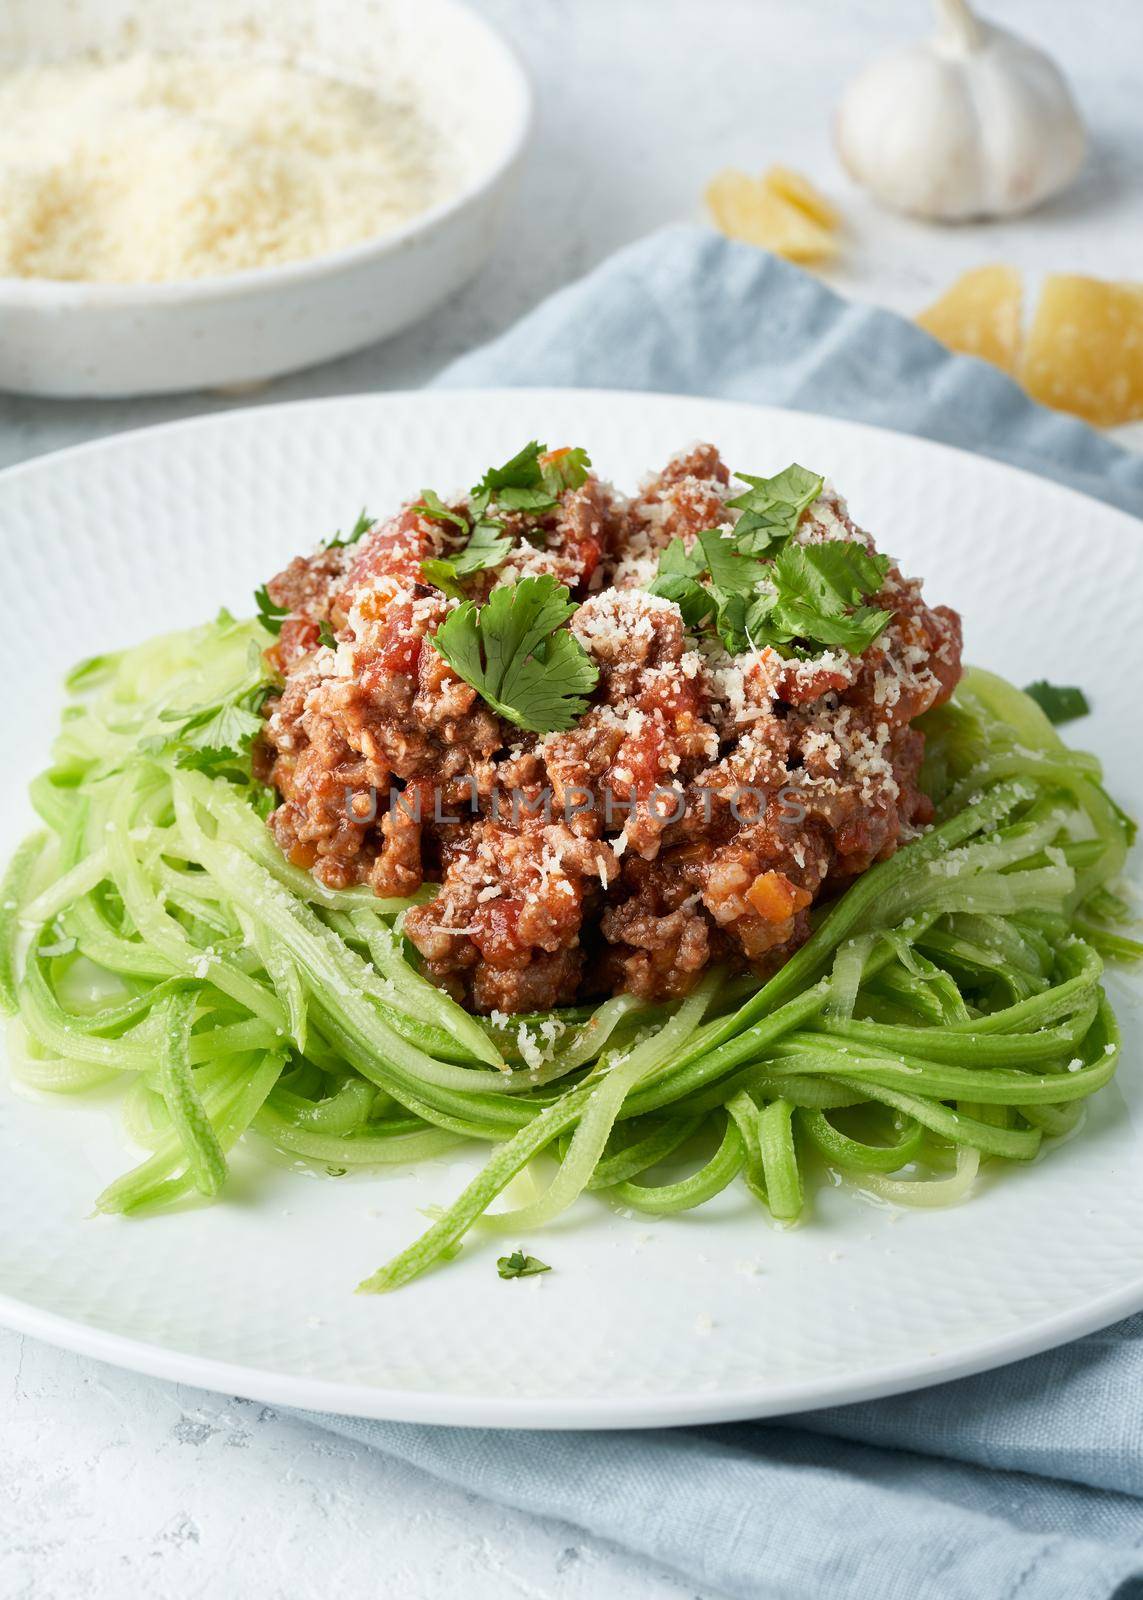 Keto pasta Bolognese with mincemeat and zucchini noodles, fodmap, lchf, low carb, ketogenic diet. Side view, close up. Clean eating, balanced food.